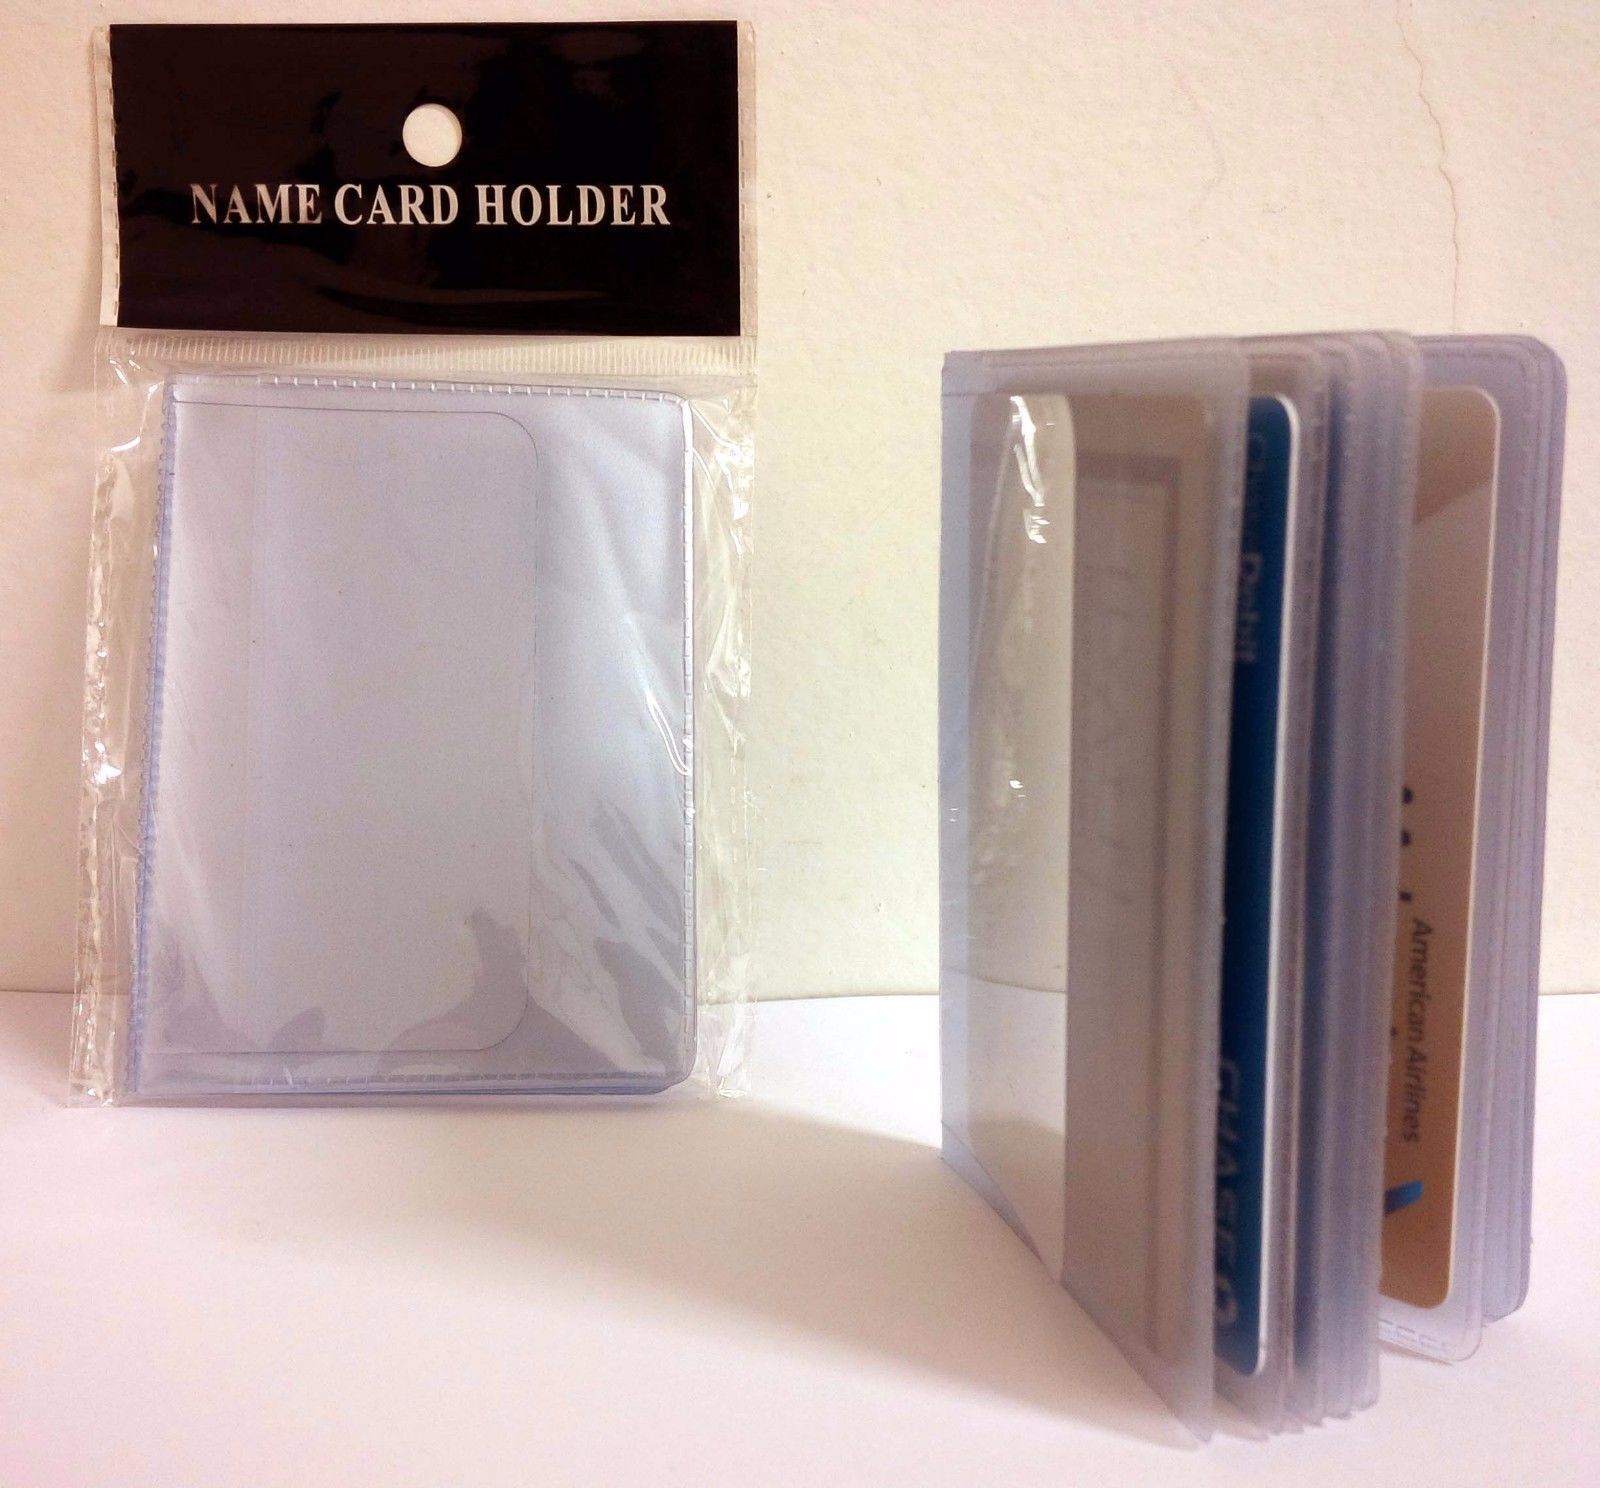 LOT OF 2 16-PAGE CREDIT CARD HOLDER PLASTIC CLEAR WALLET PHOTO INSERTS 17914  Unbranded